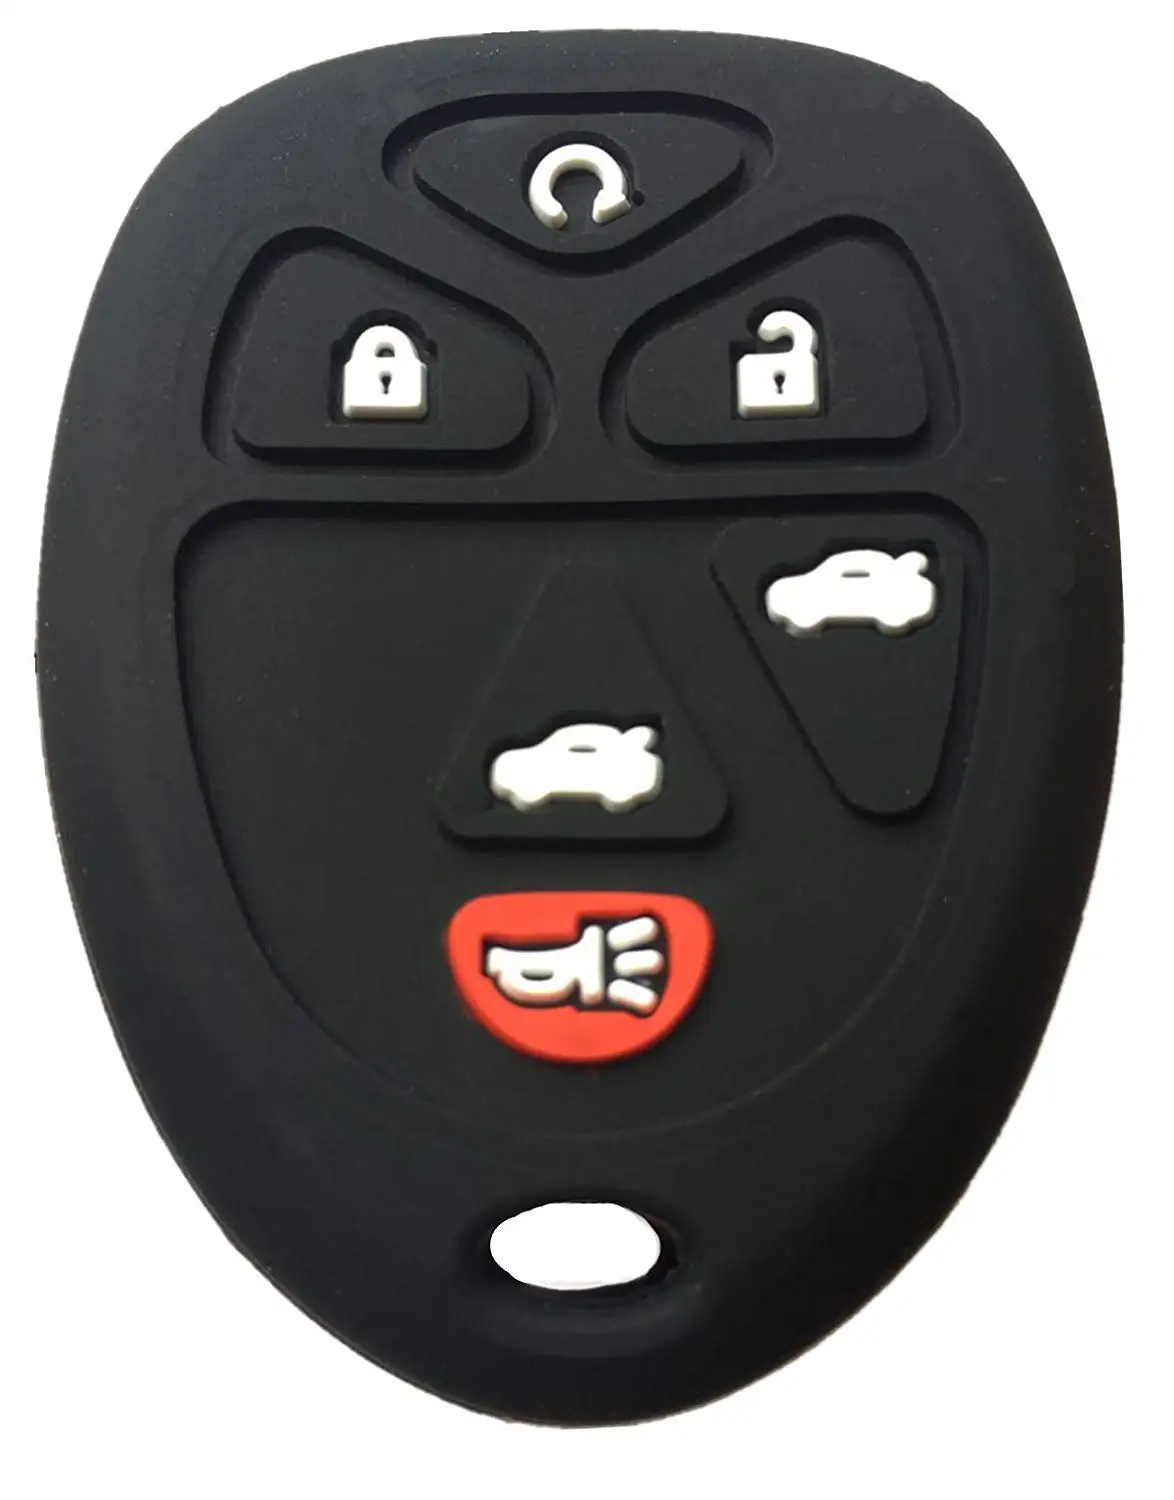 Buy Rpkey Silicone Keyless Entry Remote Control Key Fob Cover Case